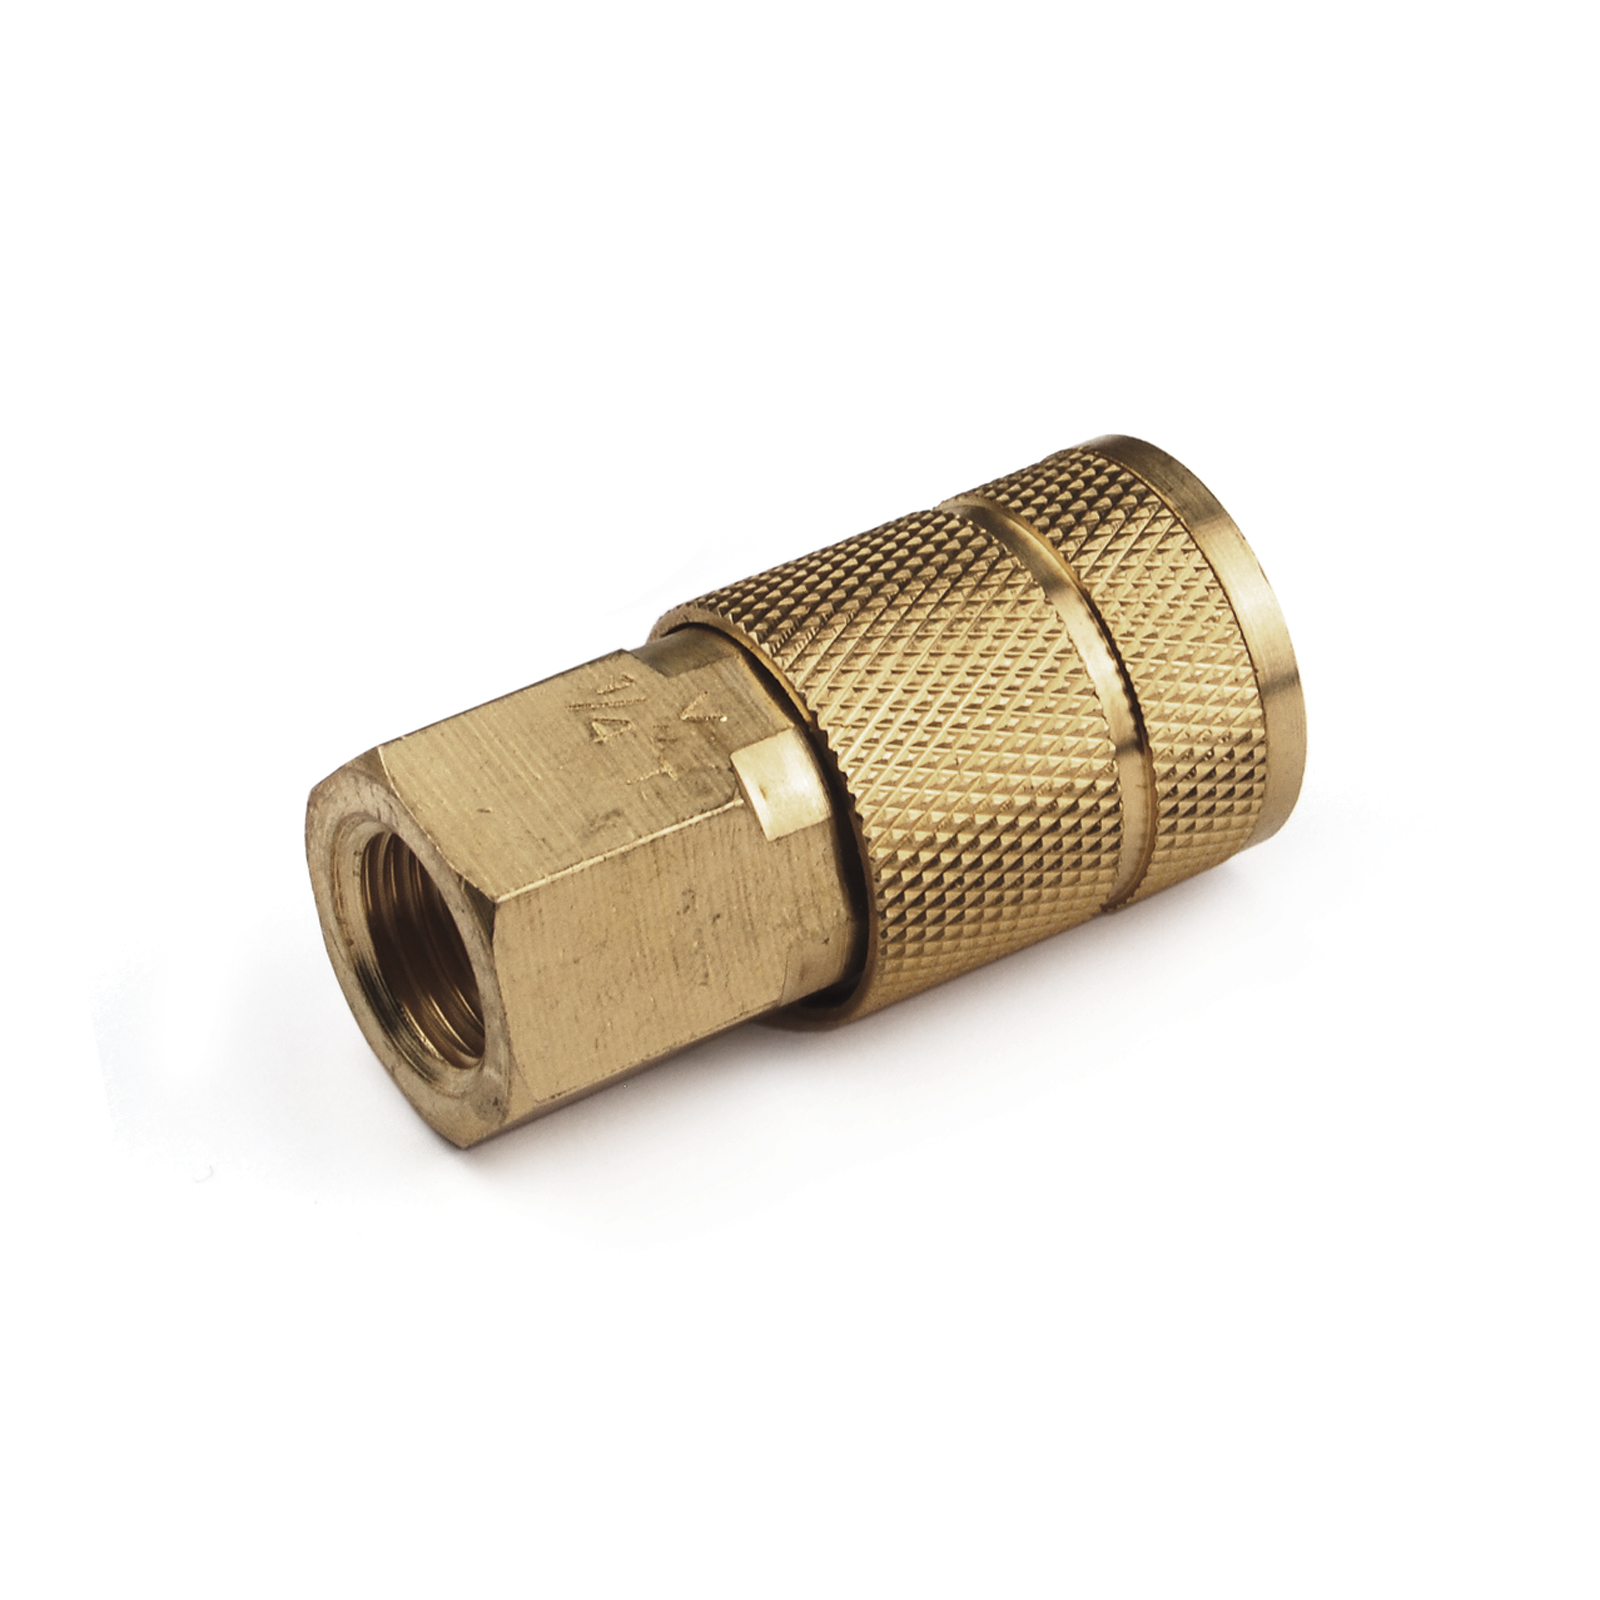 Tc1414fb6 0.25 In. Automotive 6-ball Brass Coupler With 0.25 In. Female Npt